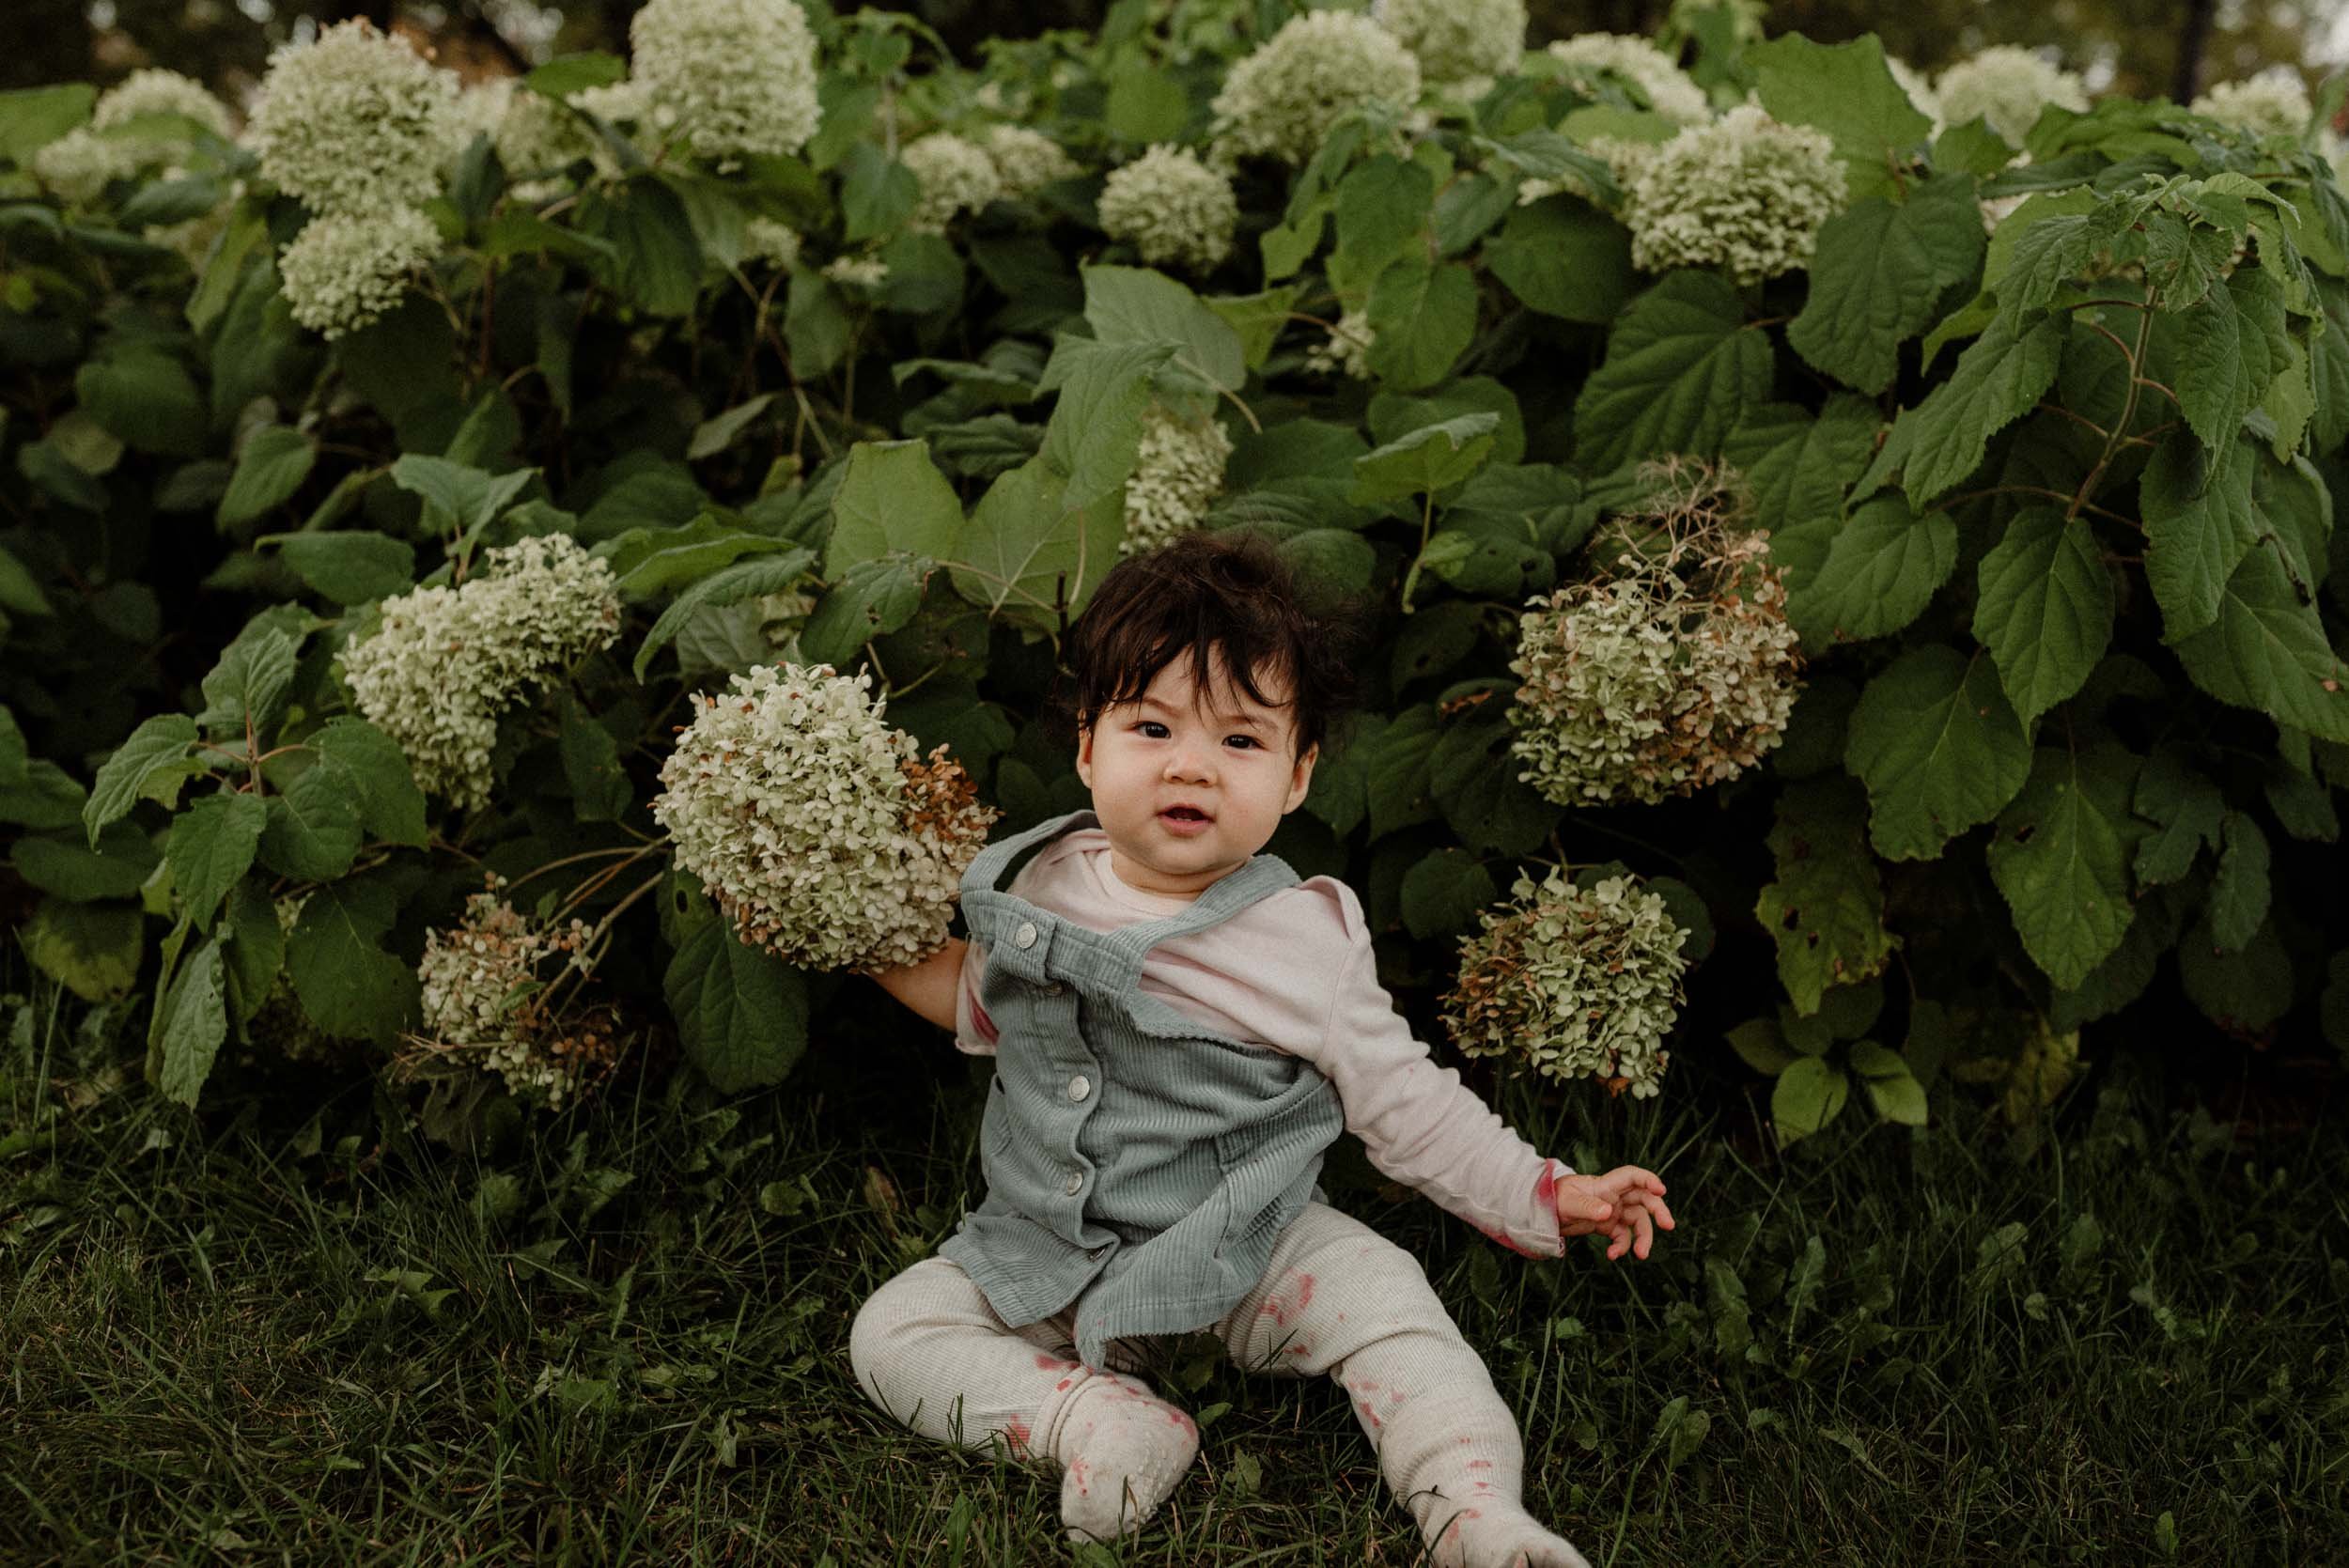 adorable picture of a baby with the floral background